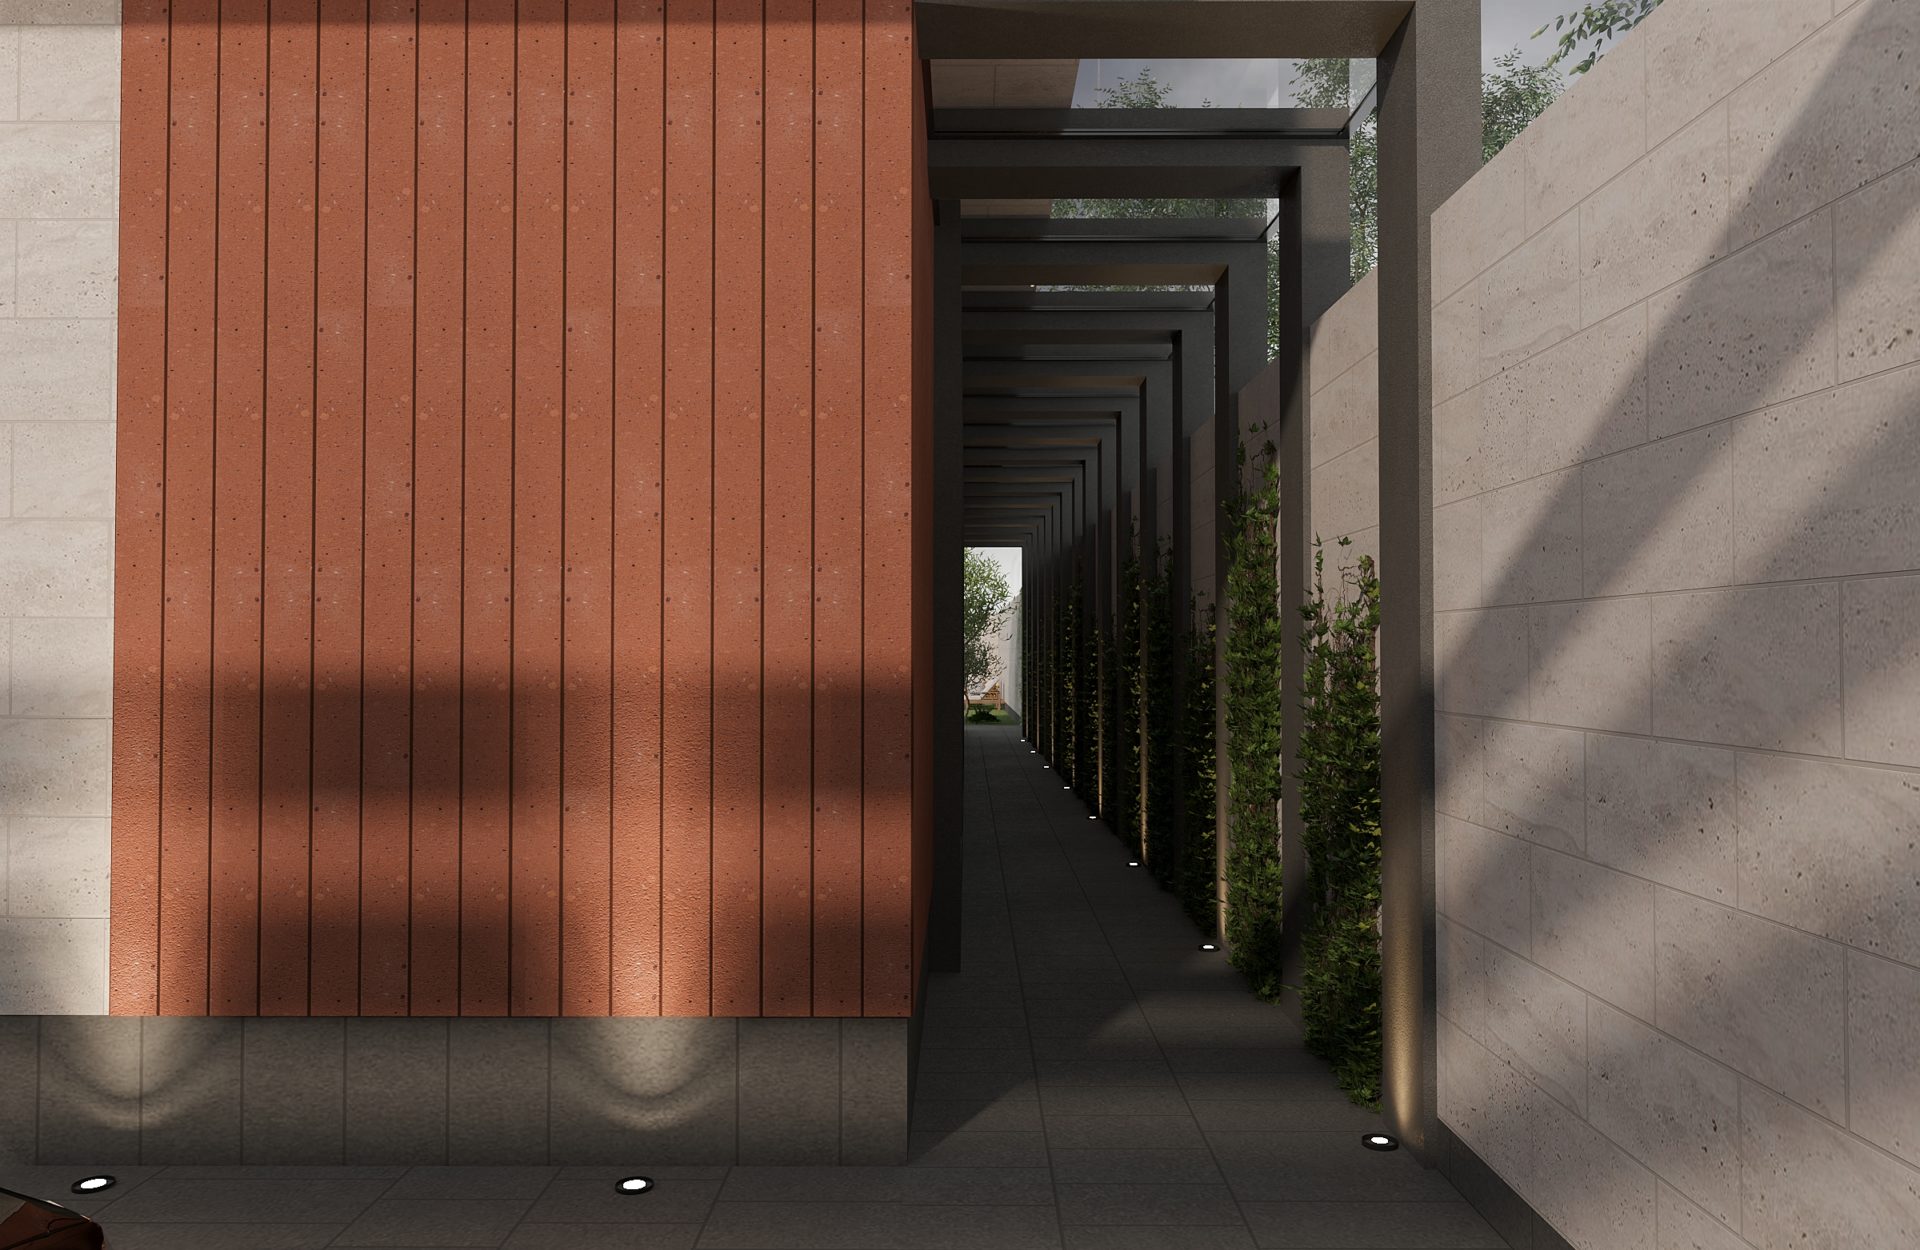 3D image of the walkway from the front of the mansion to the backyard to the pool